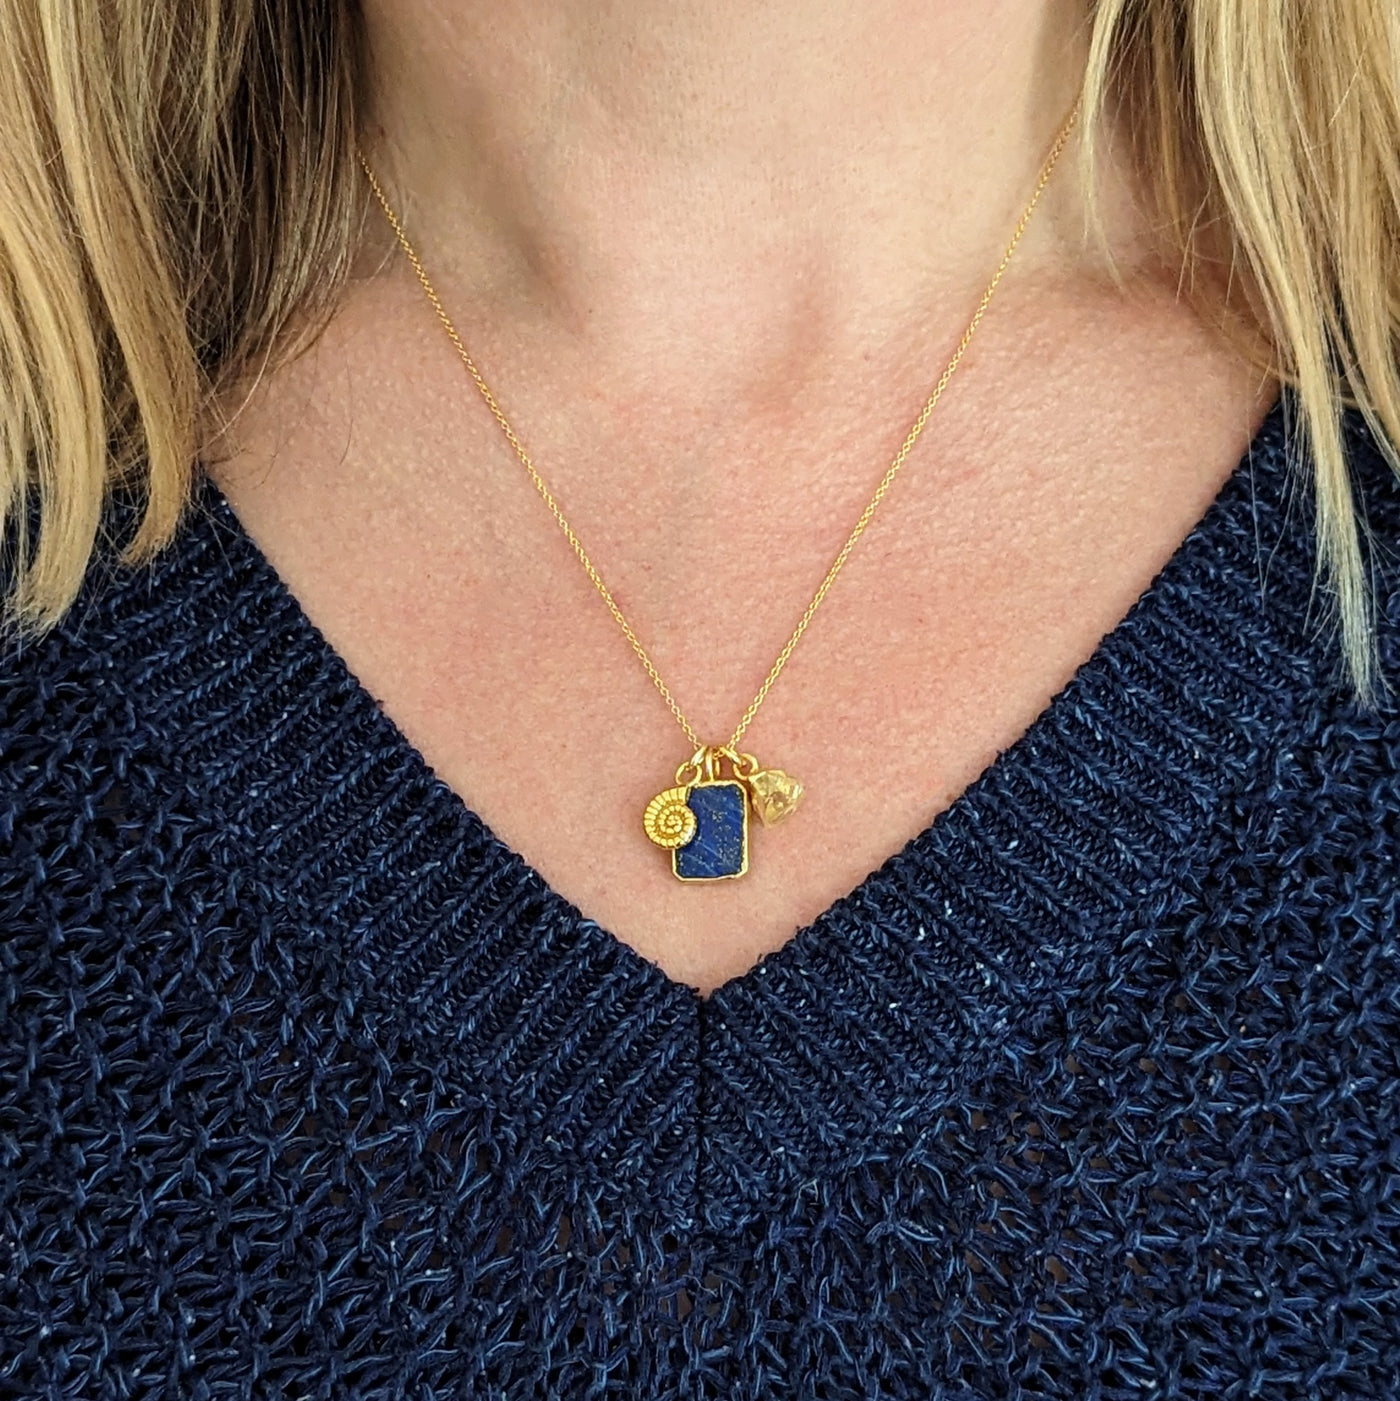 The Trio Lapis Lazuli, Citrine and Charm Gemstone Necklace - 18CT Gold Plated